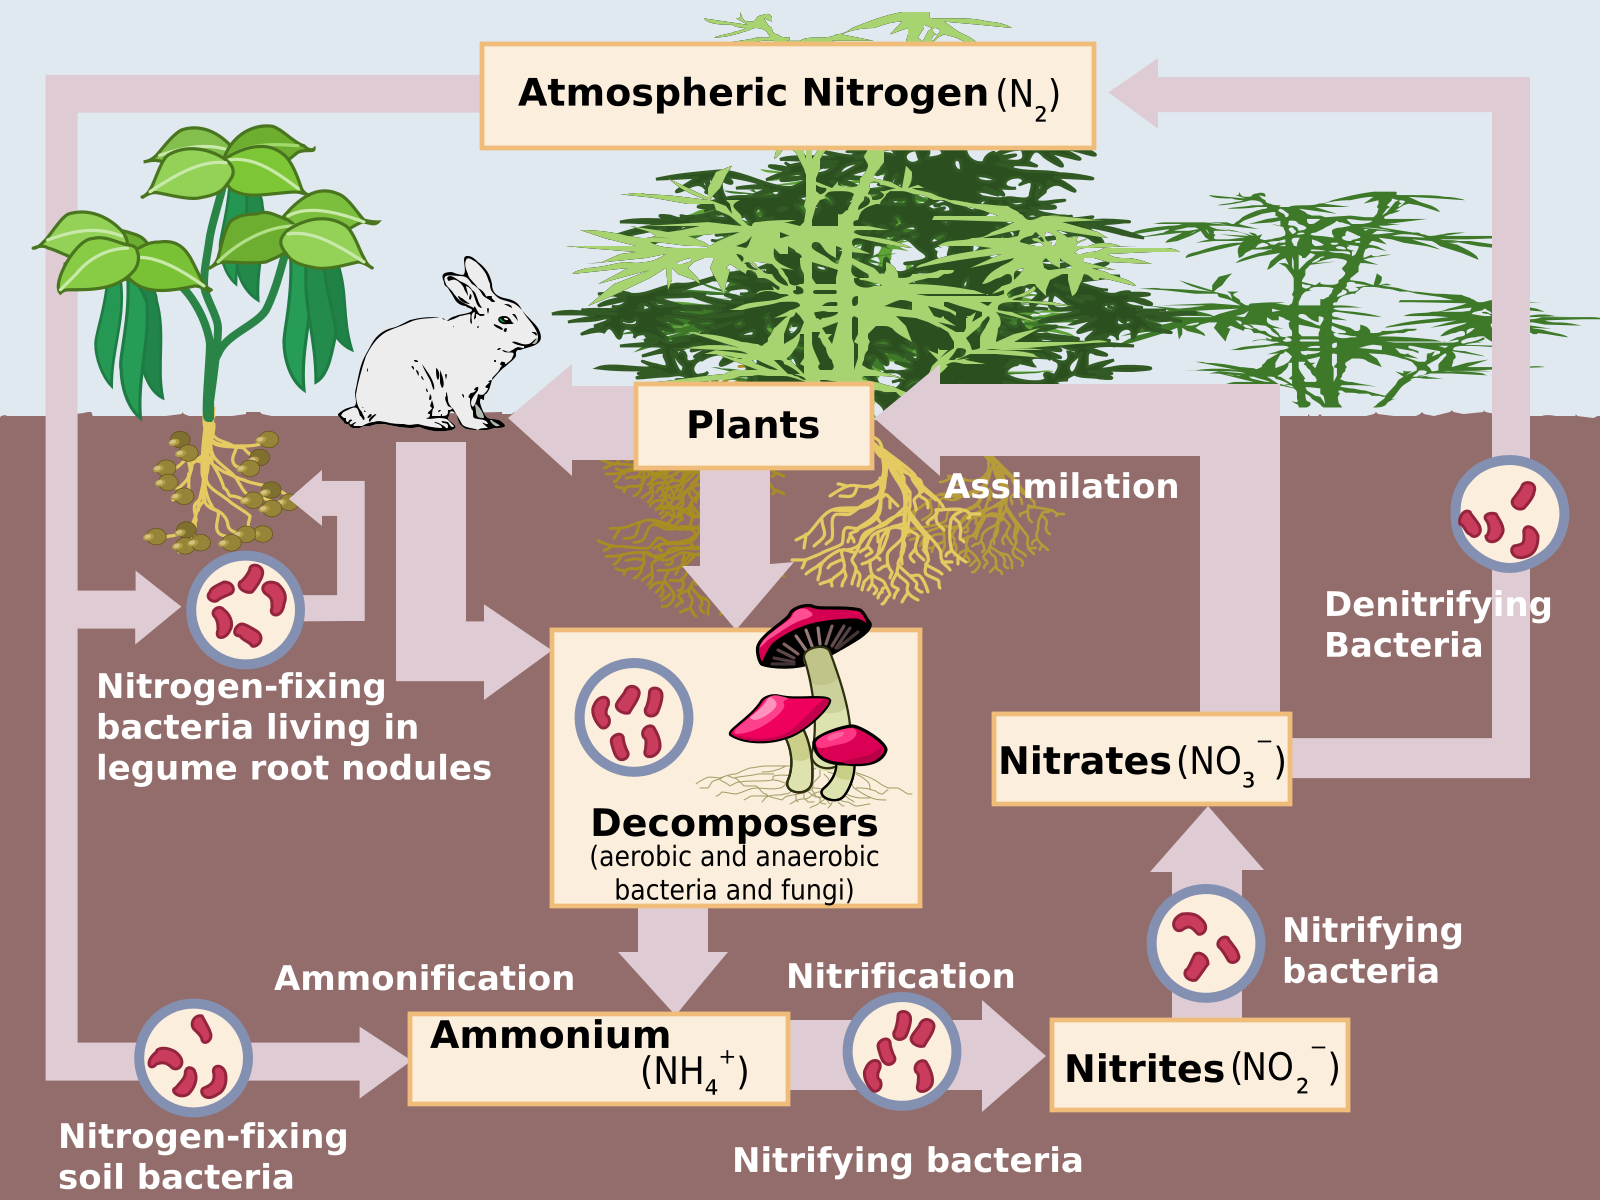 The image shows the way nitrogen can move around, mostly in the soil